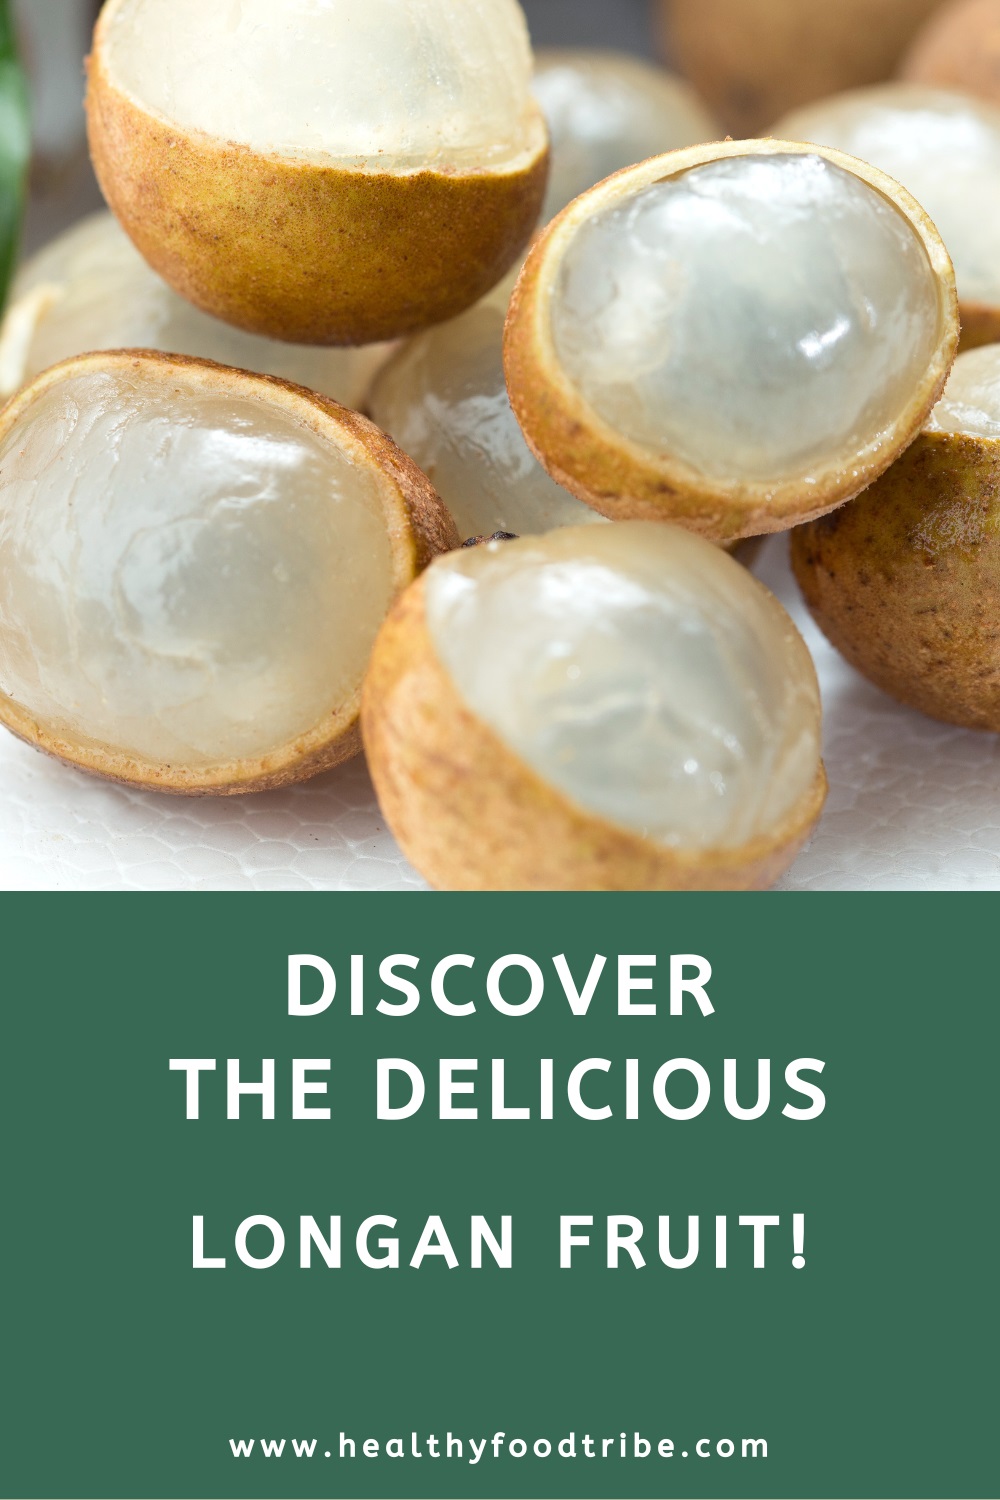 Discover the delicious longan fruit